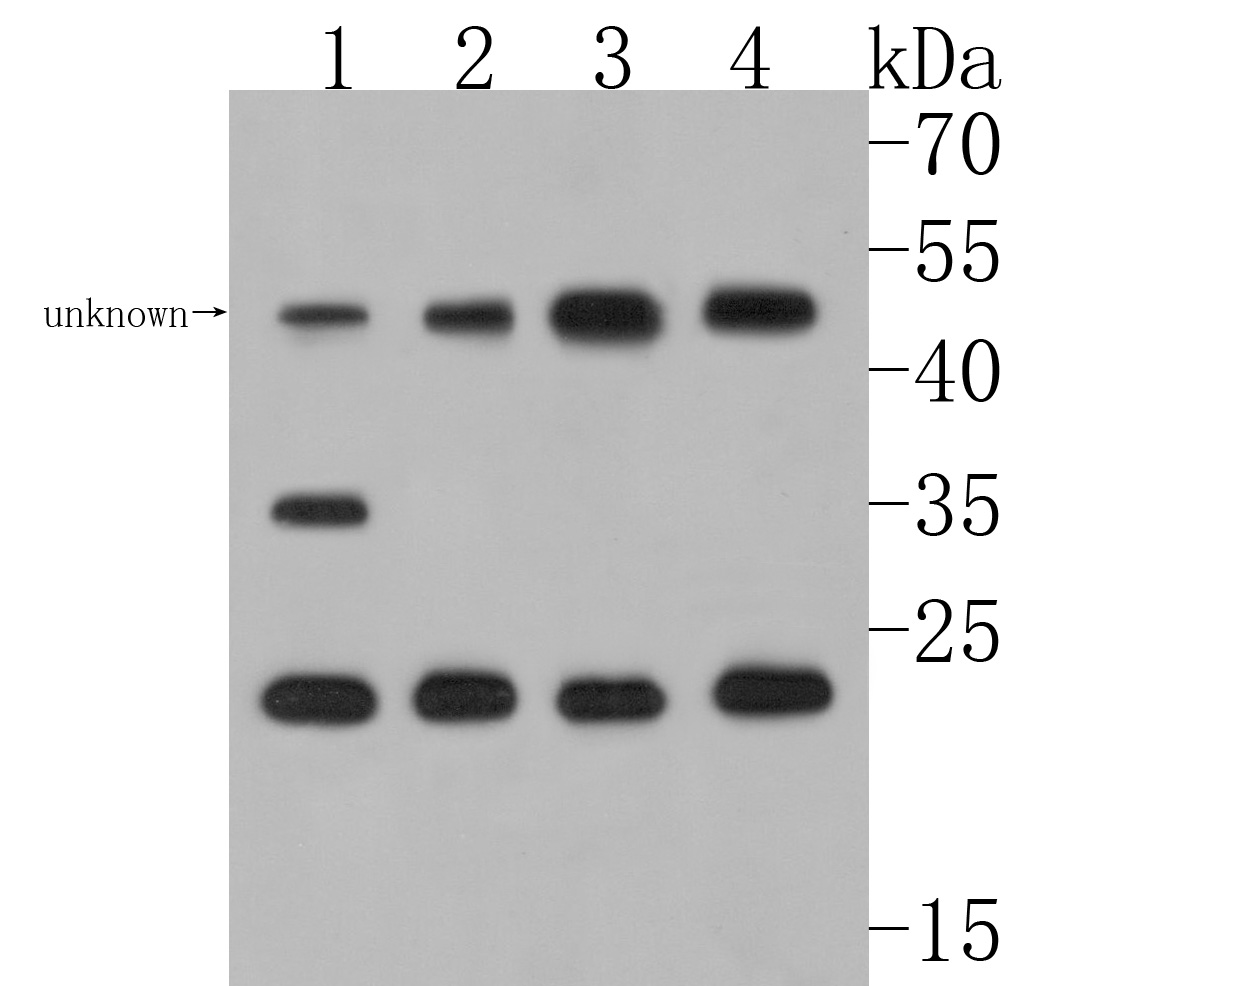 Western blot analysis of Myelin PLP on different lysates. Proteins were transferred to a PVDF membrane and blocked with 5% BSA in PBS for 1 hour at room temperature. The primary antibody (HA500202, 1/500) was used in 5% BSA at room temperature for 2 hours. Goat Anti-Rabbit IgG - HRP Secondary Antibody (HA1001) at 1:5,000 dilution was used for 1 hour at room temperature.<br />
Positive control: <br />
Lane 1: HepG2 cell lysate<br />
Lane 2: Mouse cerebellum tissue lysate<br />
Lane 3: Mouse brain tissue lysate<br />
Lane 4: Rat brain tissue lysate